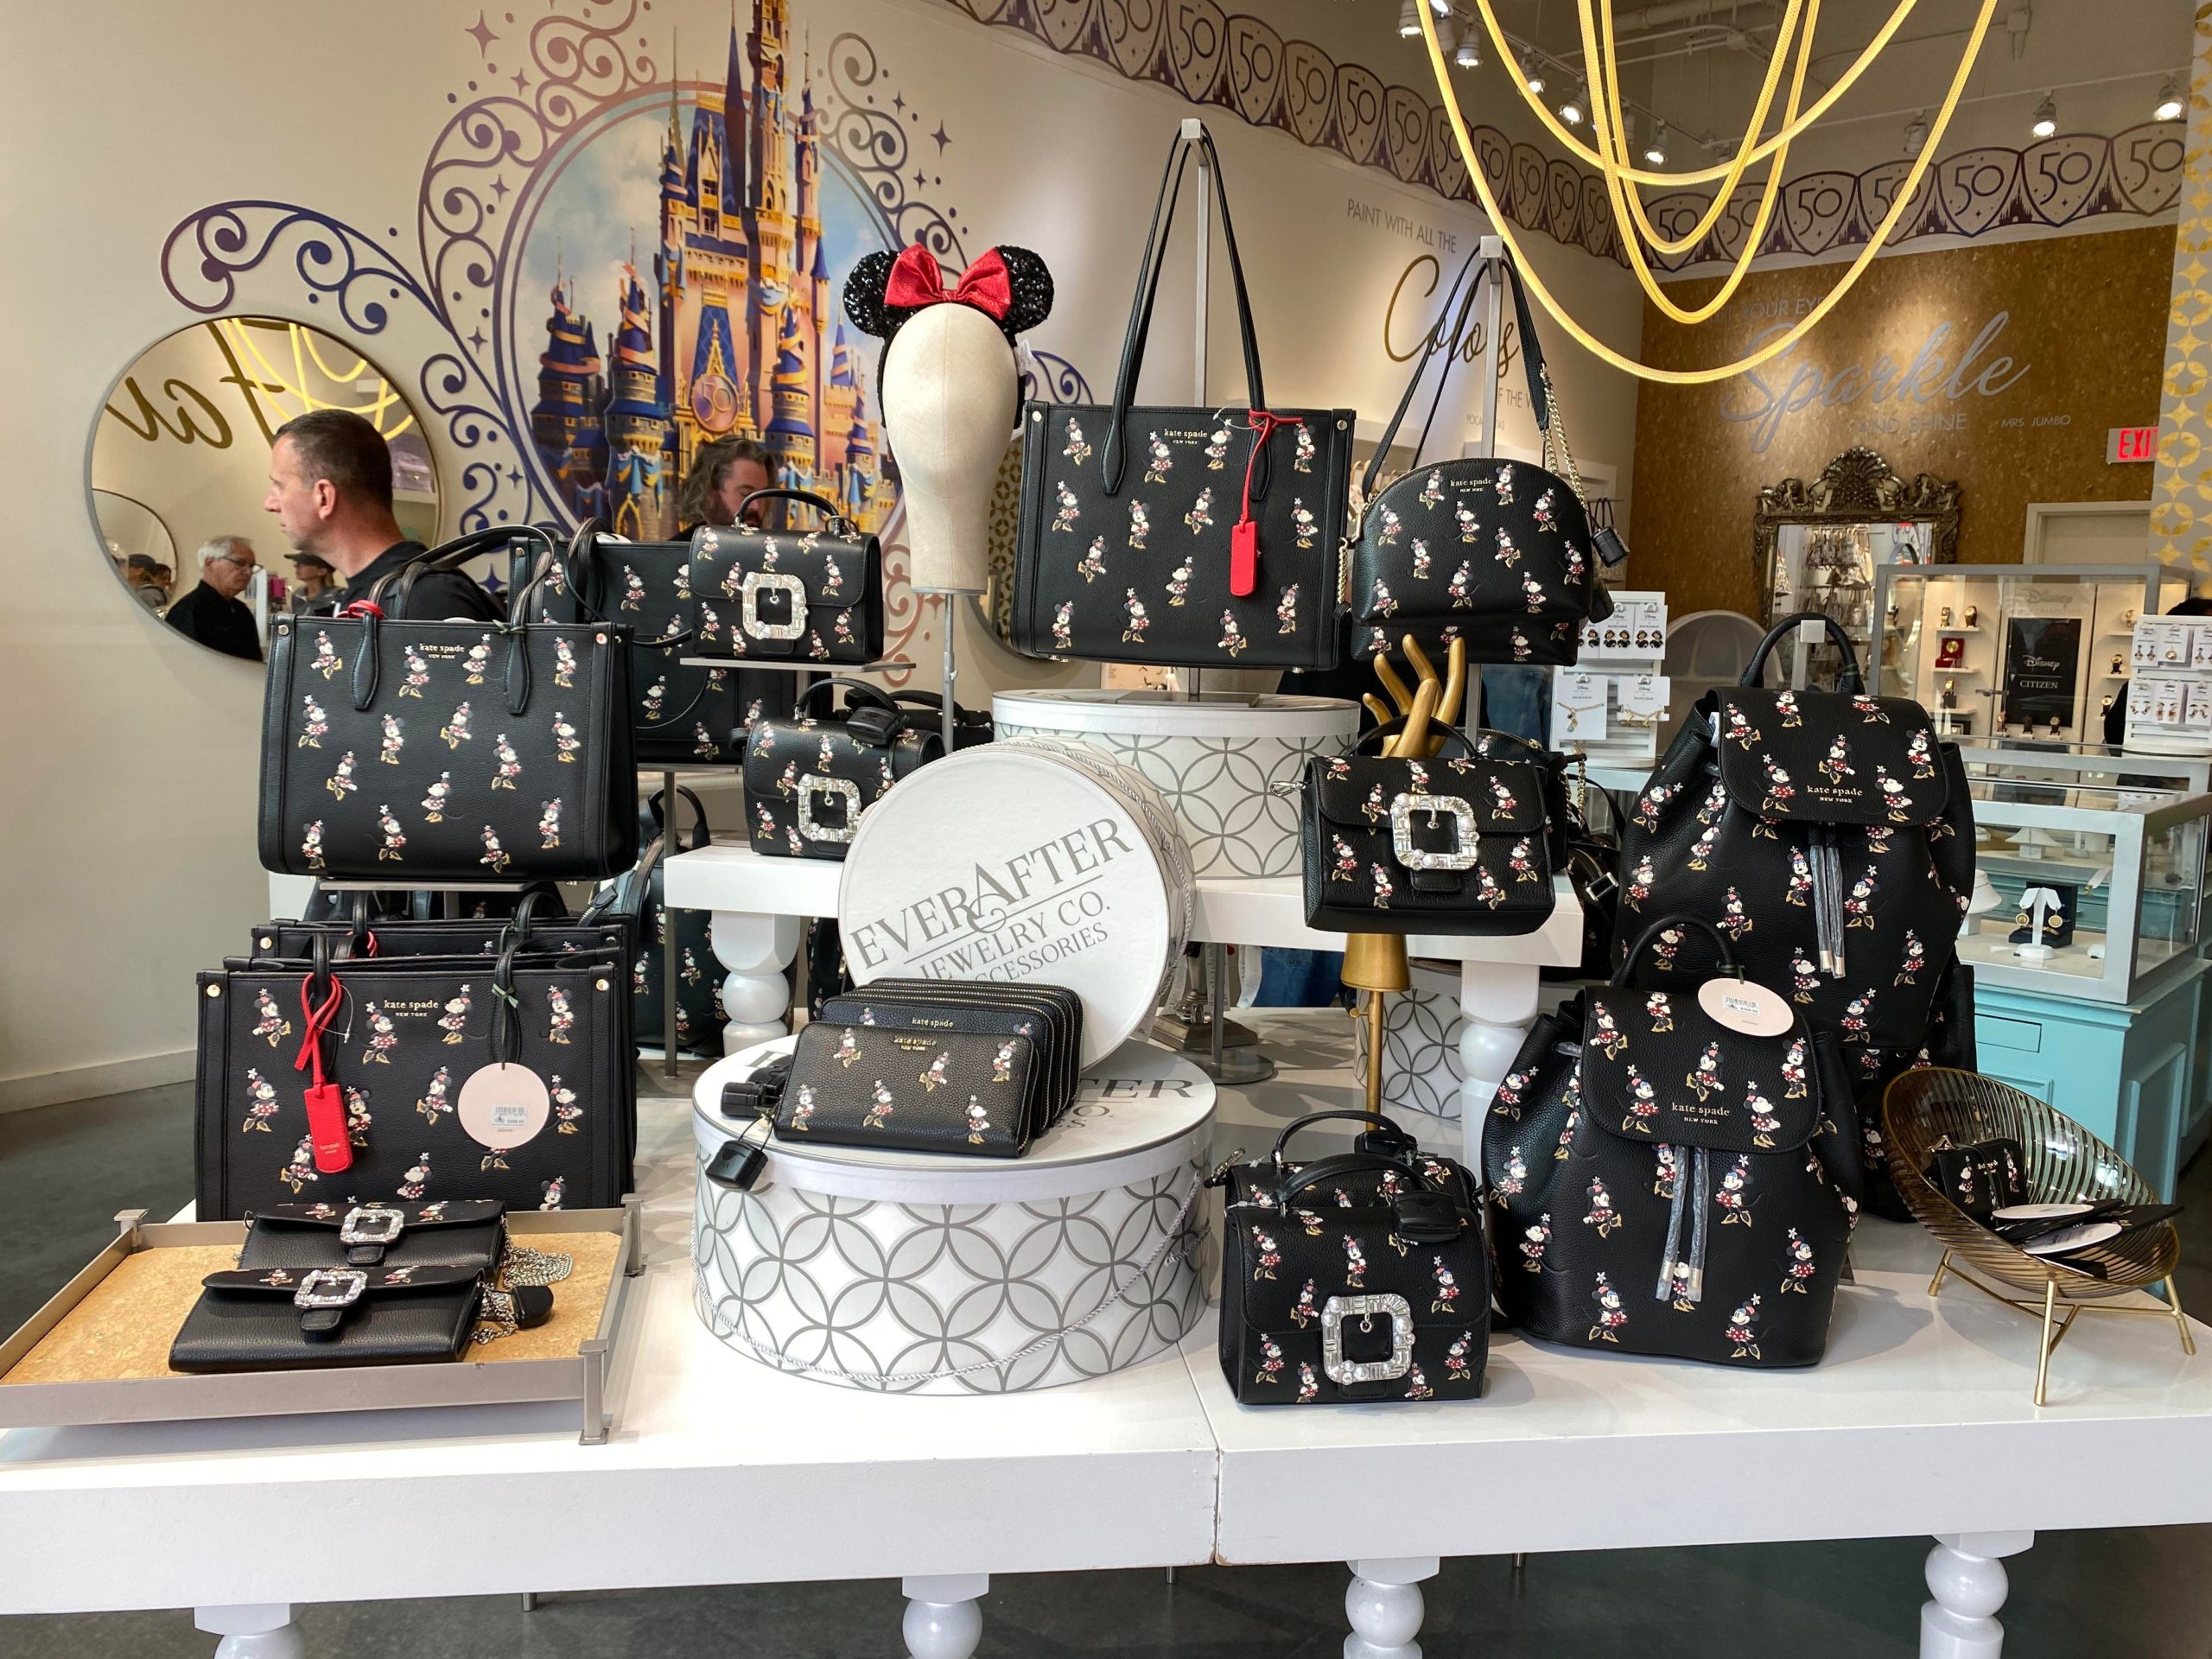 Minnie Mouse Collection by Kate Spade New York 